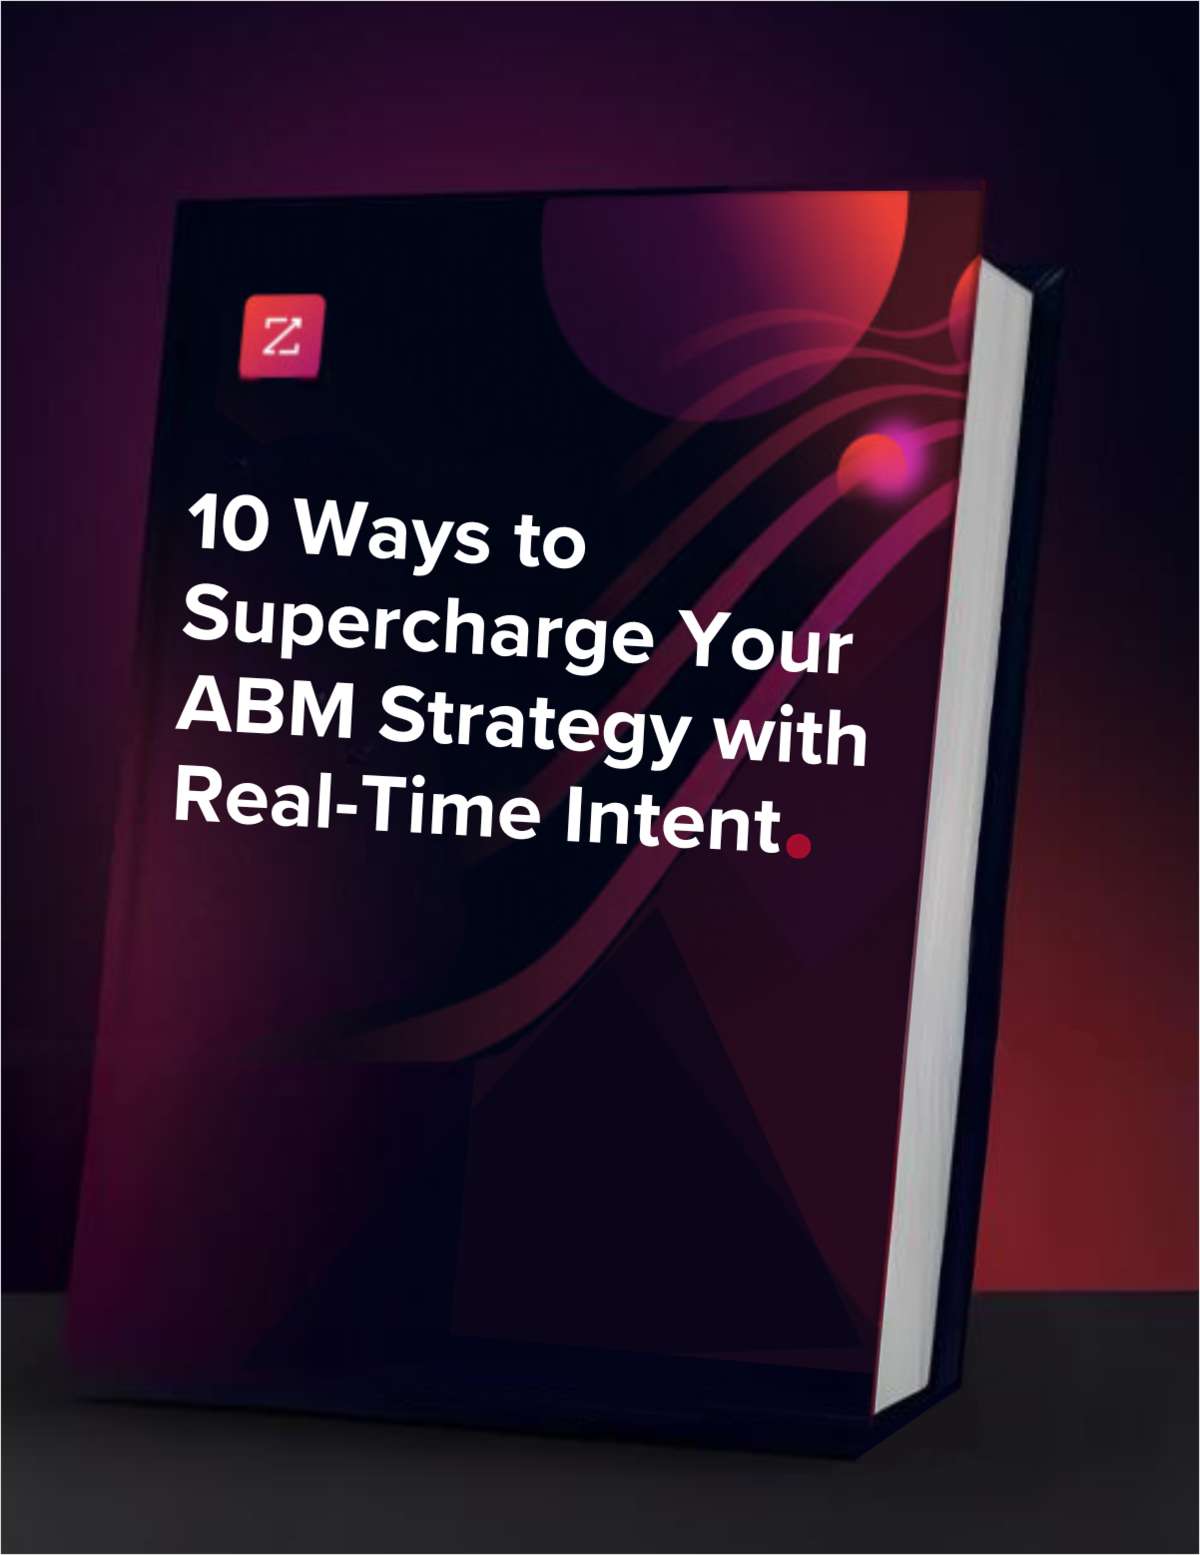 10 Ways to Supercharge Your ABM Strategy with Real-Time Intent